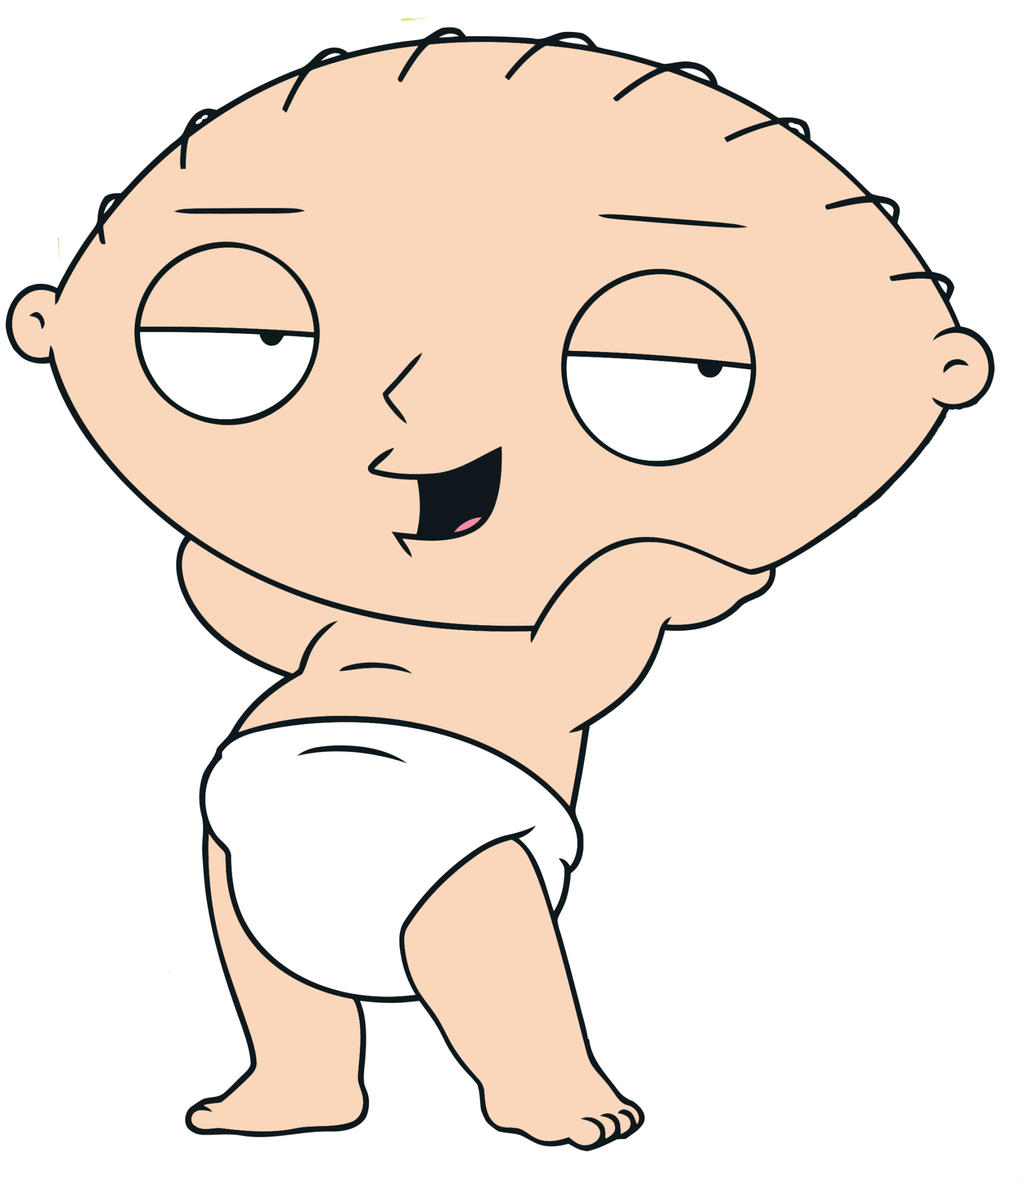 stewie_griffin__family_guy___02_by_frasier_and_niles_d8vbipa-fullview.jpg